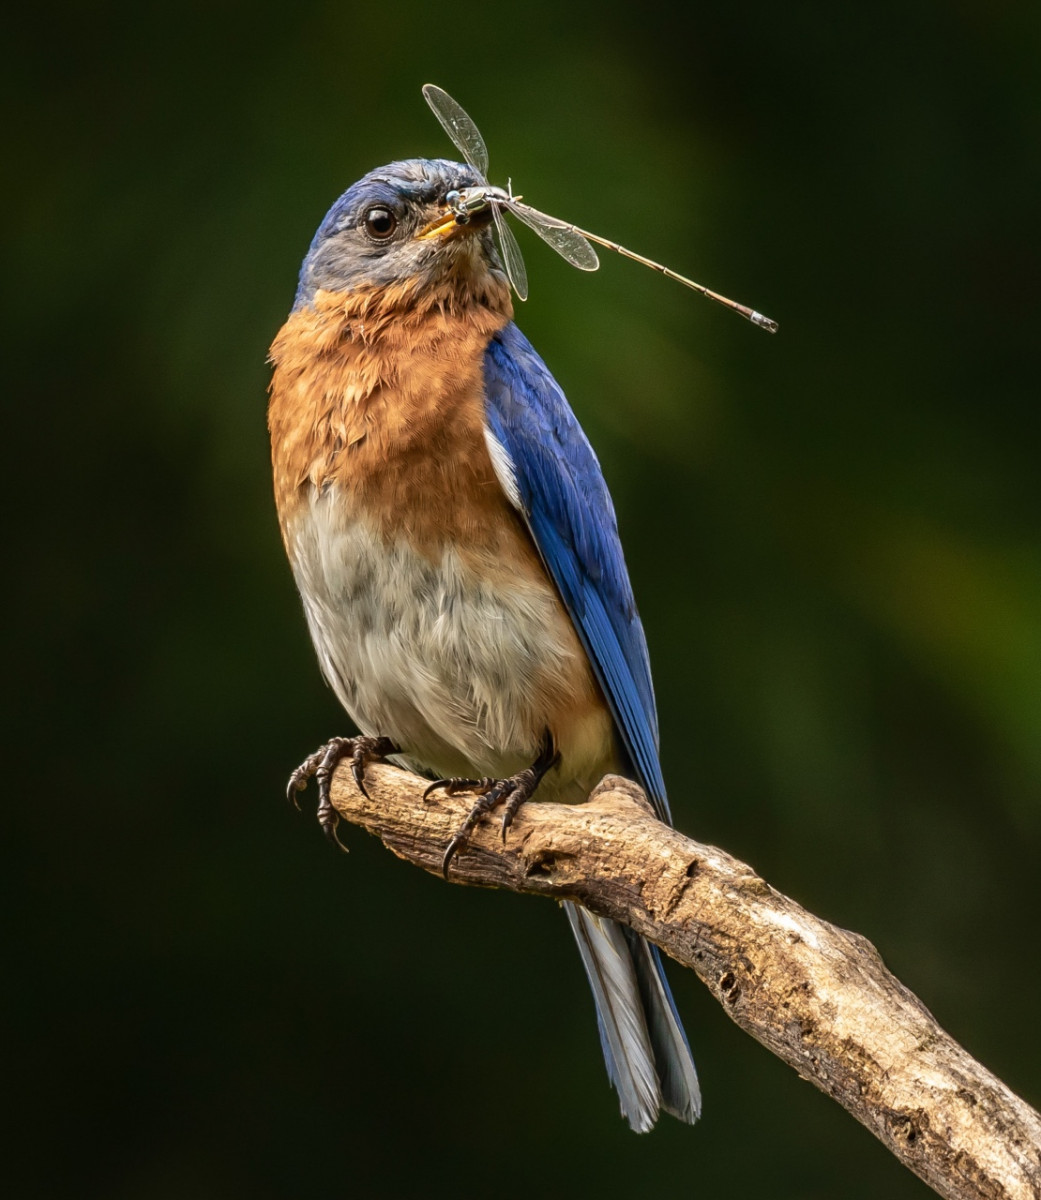 Runner-Up Image of the Year - Bluebird With Damselfly - Don Specht - MNPC